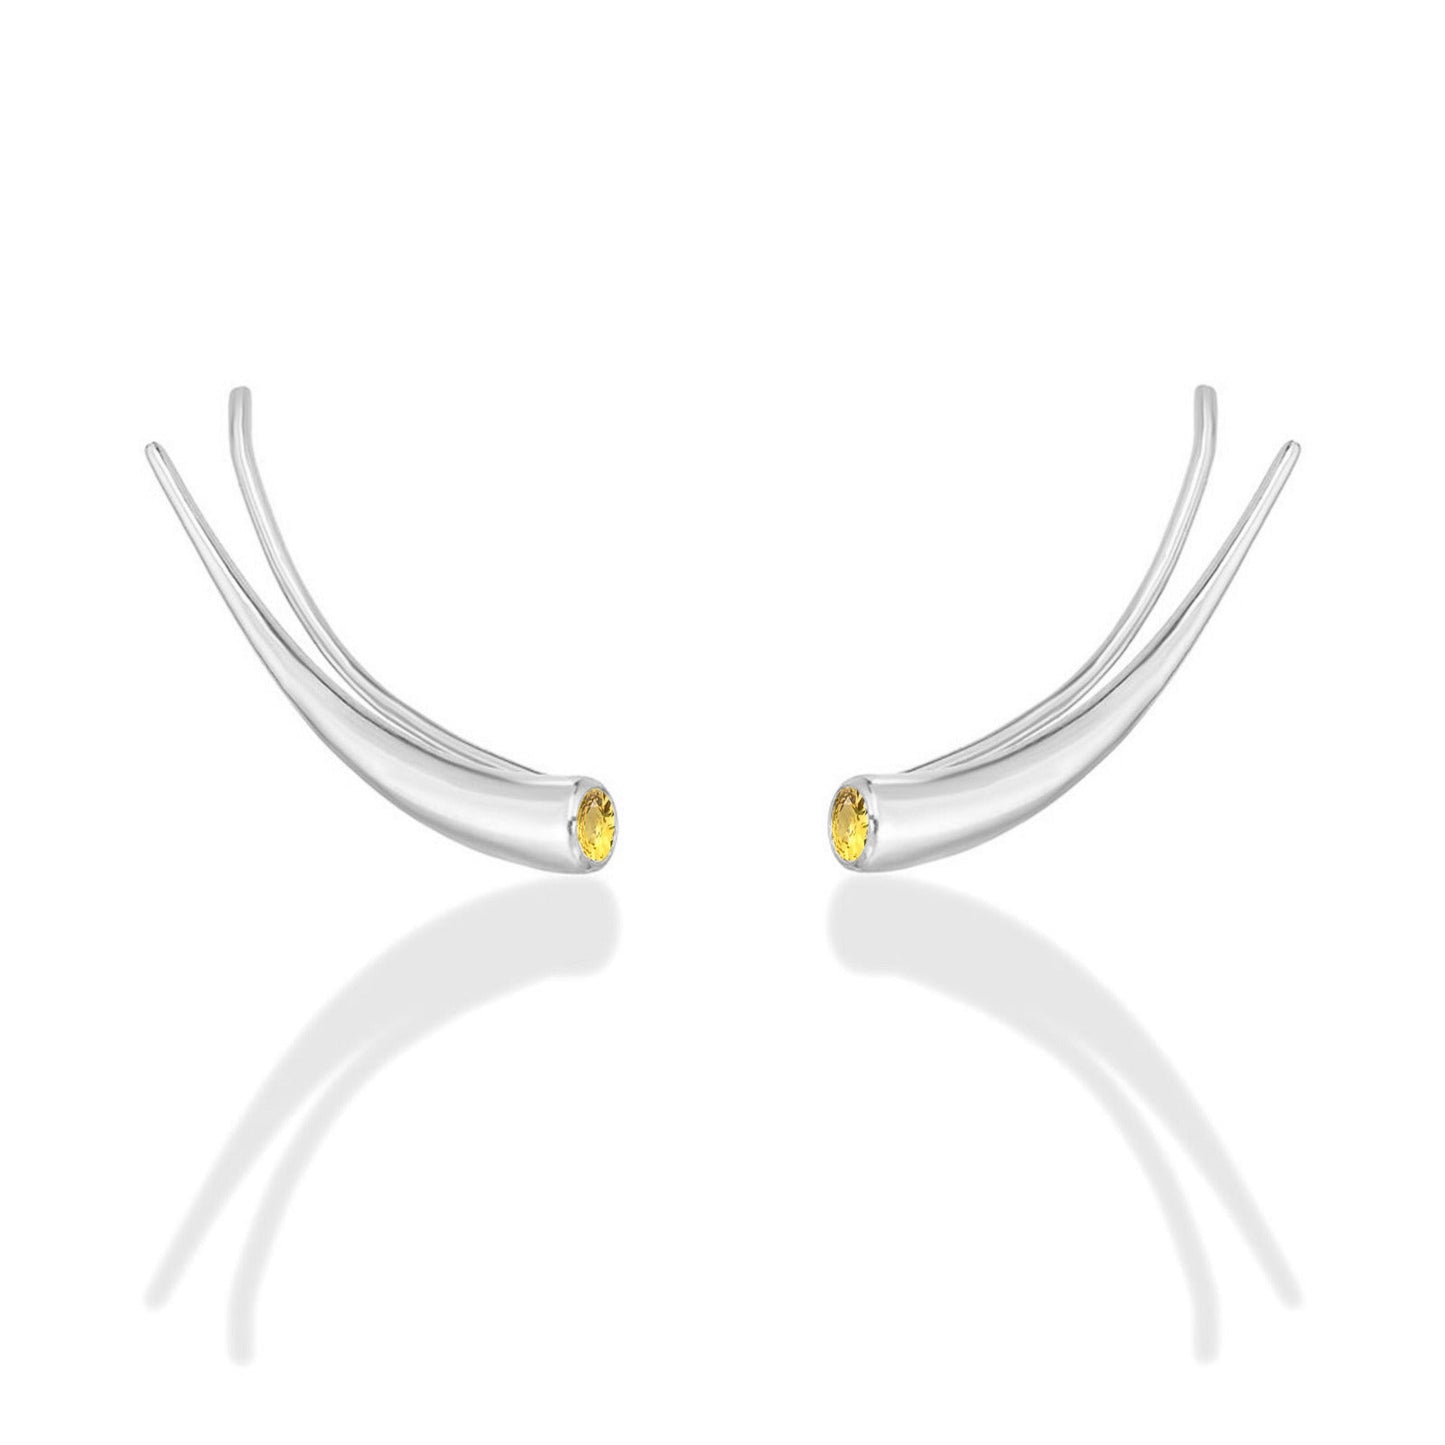 14k white gold Curved Quill Climber Earrings with yellow topaz